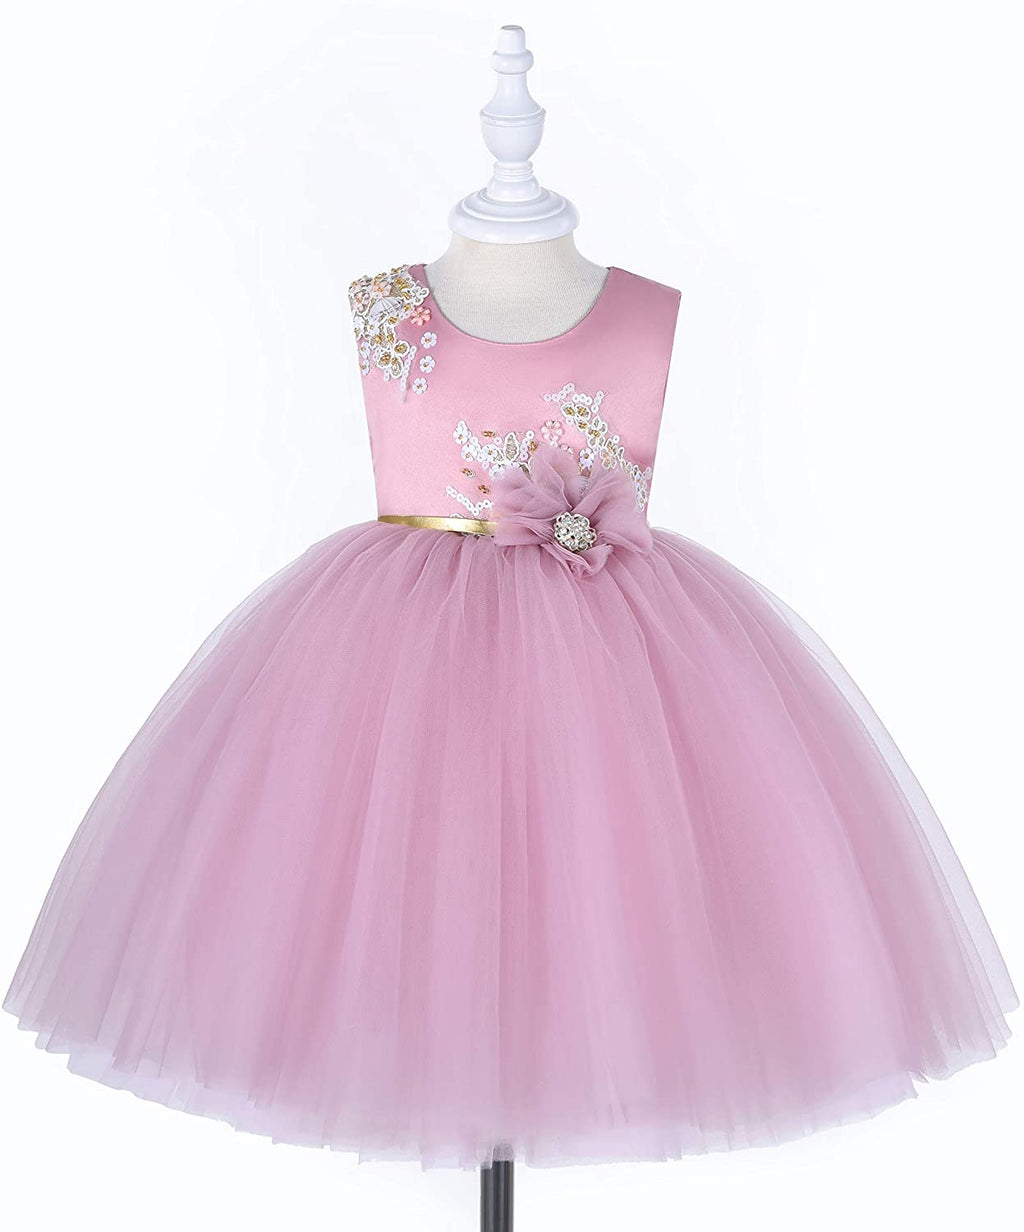 Floral Dresses For Girls - C1 - 2-10 Years Old